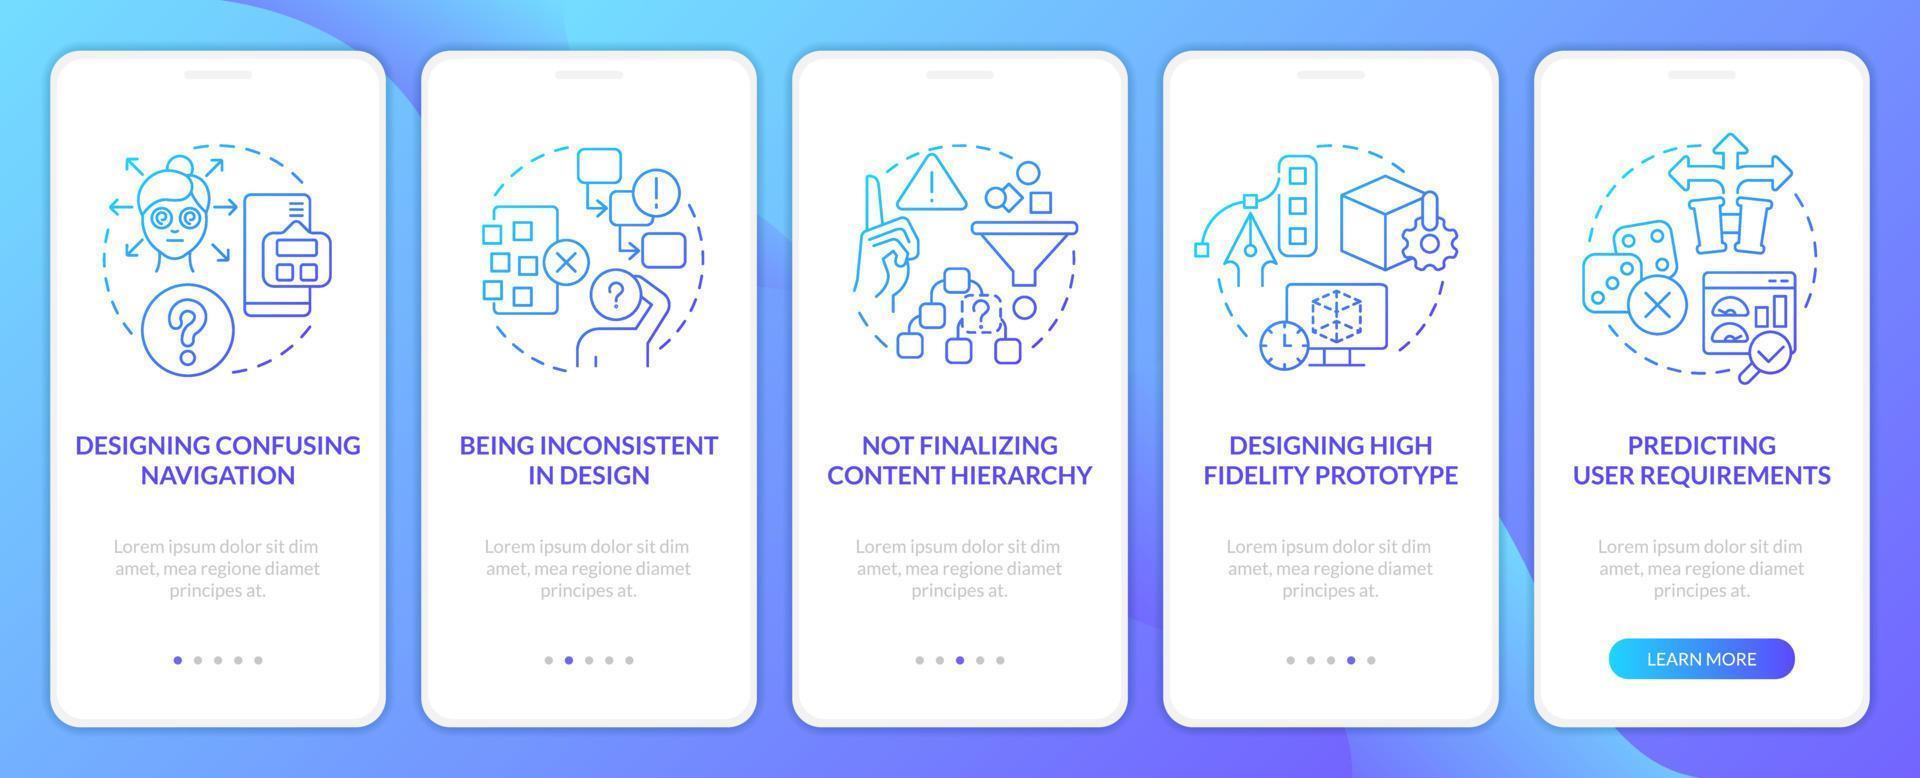 Bad user experience design blue gradient onboarding mobile app screen. Walkthrough 5 steps graphic instructions with linear concepts. UI, UX, GUI template vector